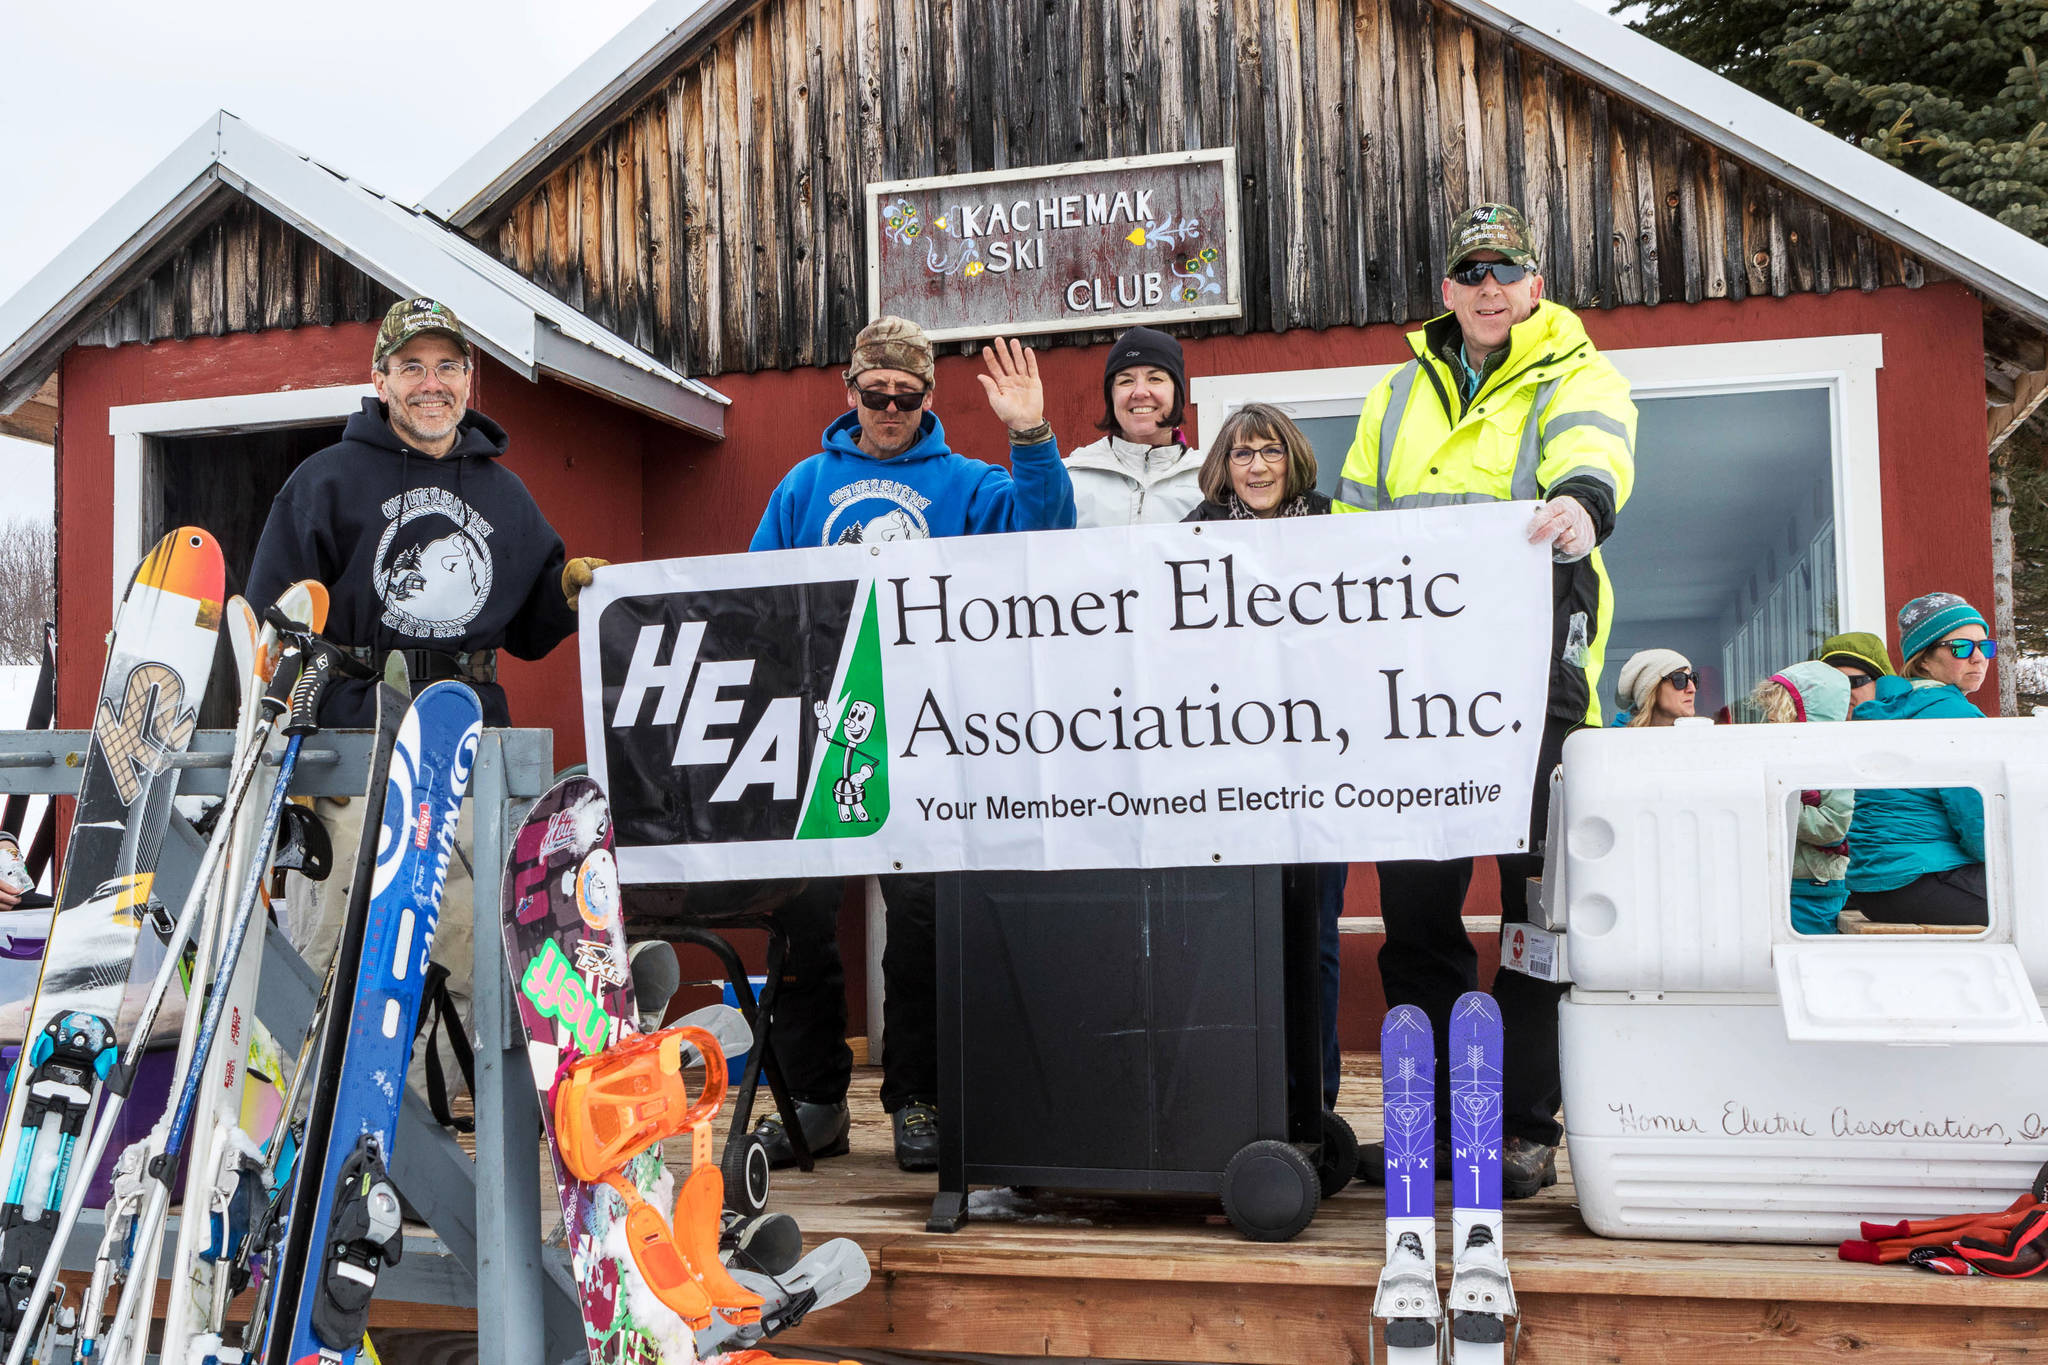 Kachemak Ski Club members on Sunday hold a Homer Electric Association banner for HEA Day at the Homer Rope Tow, Ohlson Mountain. HEA has been a longtime supporter of the club and rope tow. (Photo by Don Pitcher)